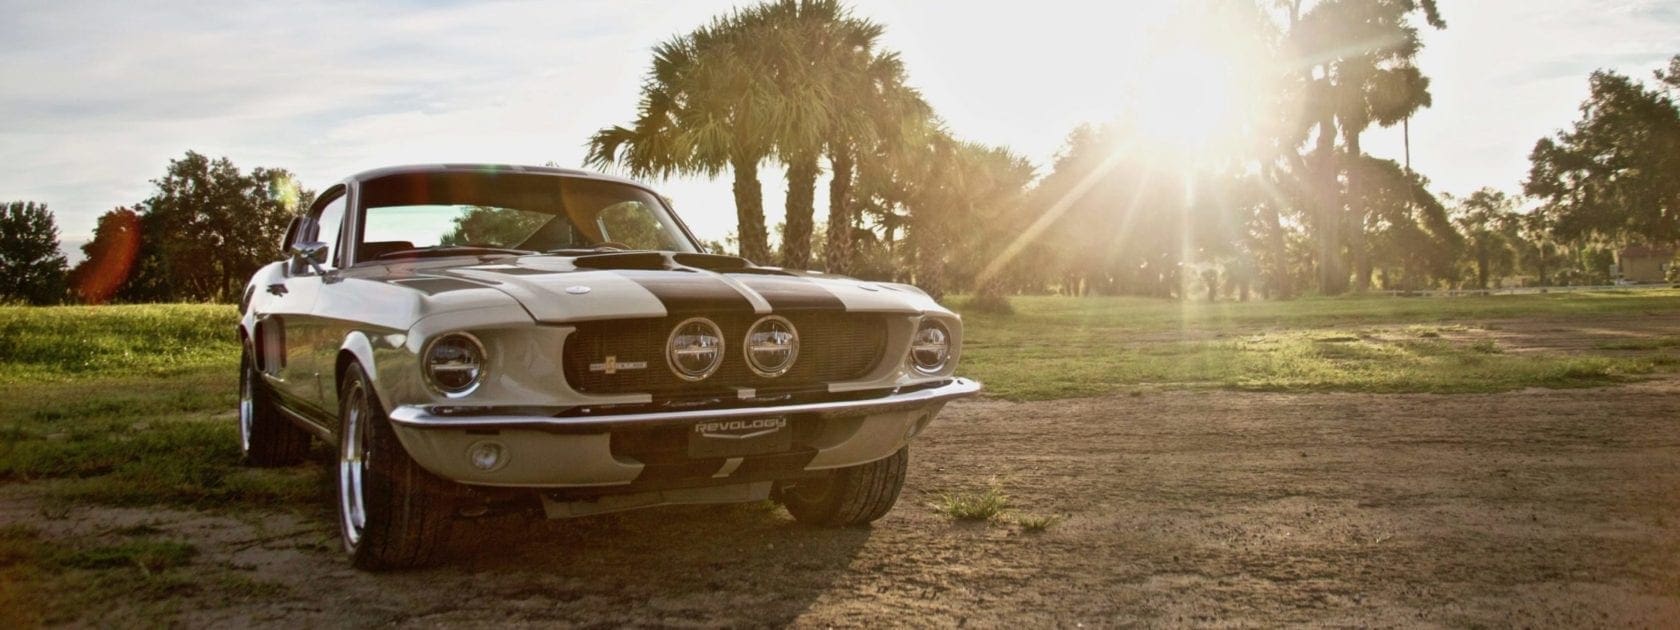 Revology's Ford Mustang Shelby GT350 replica is a thoroughly-modern thoroughbred